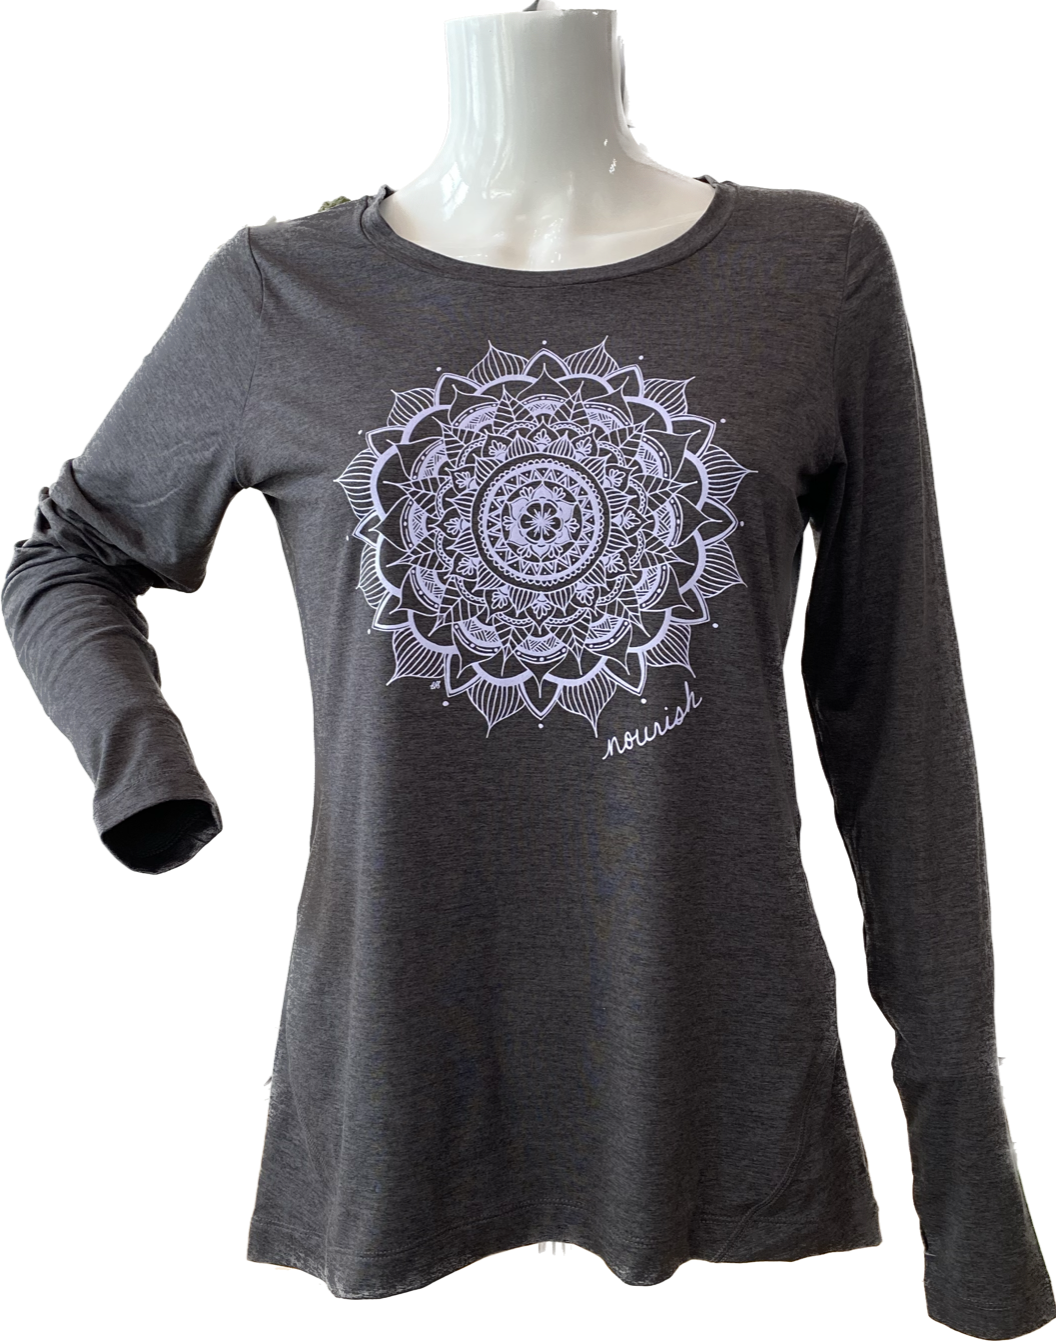 Product Image : Front View - Women's Long-sleeved Athletic Crew - Grey with large light lavender mandala design in the center